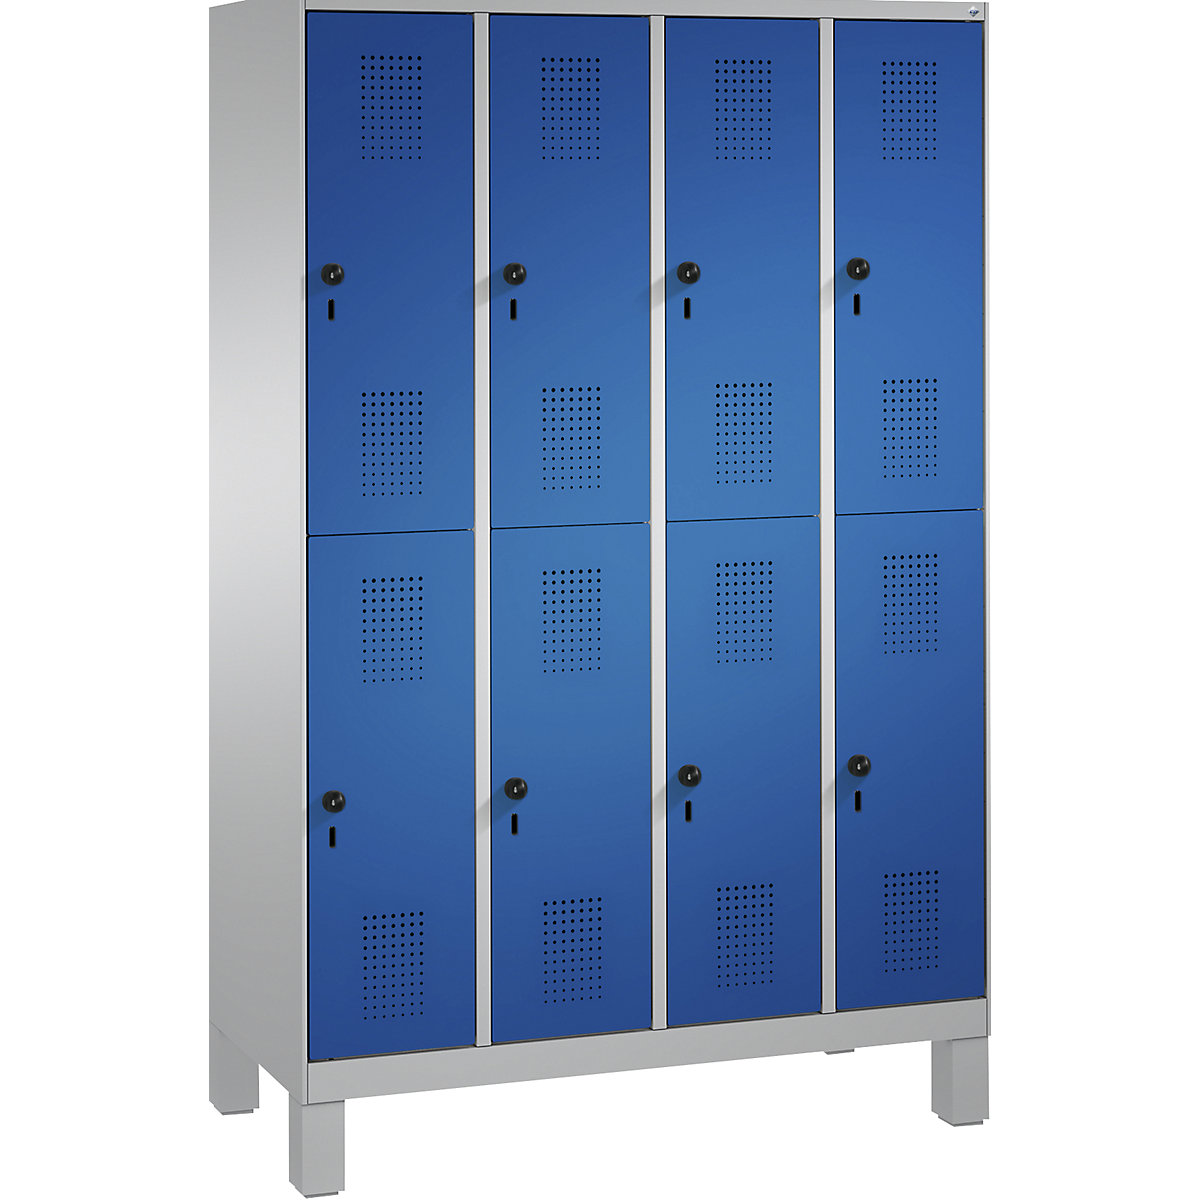 EVOLO cloakroom locker, double tier, with feet – C+P, 4 compartments, 2 shelf compartments each, compartment width 300 mm, white aluminium / gentian blue-13